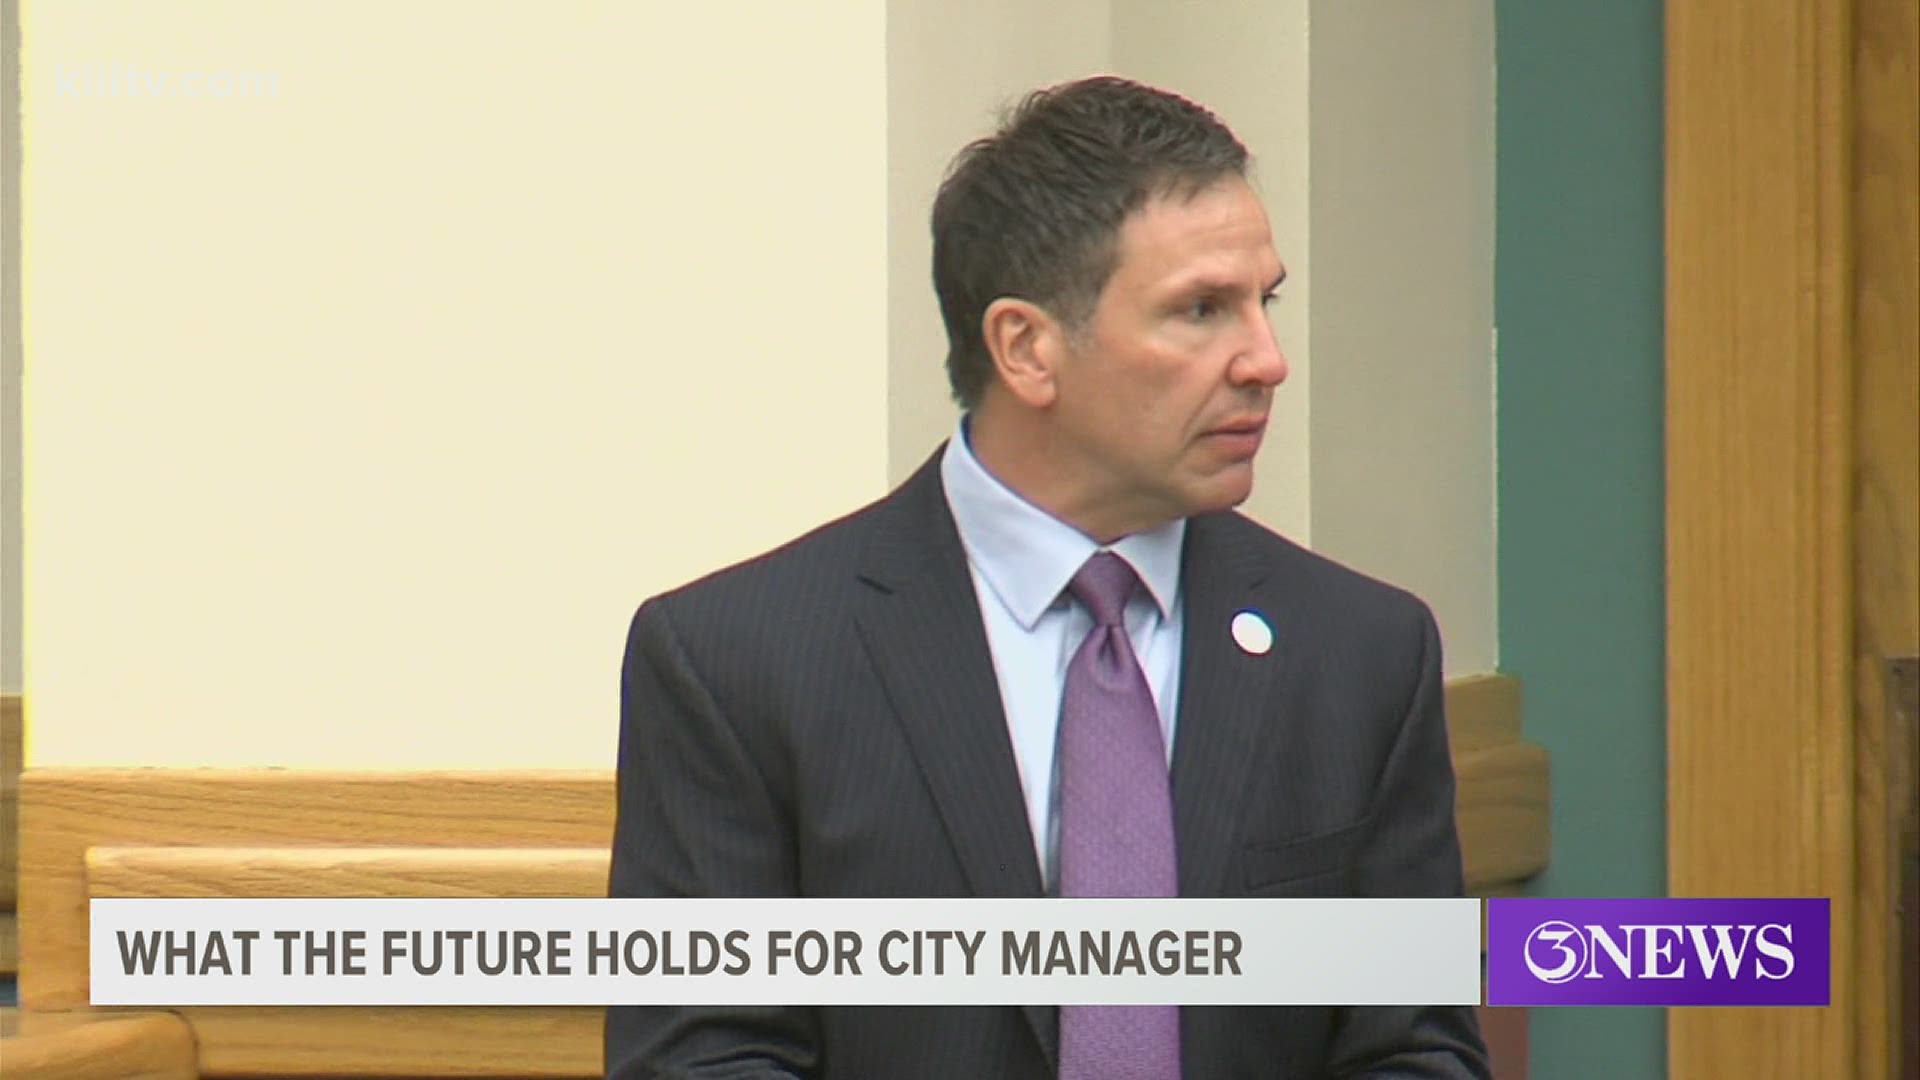 Zanoni said in his initial interview with city council members, he told him that it could take up to a decade and a half to get things straightened out.